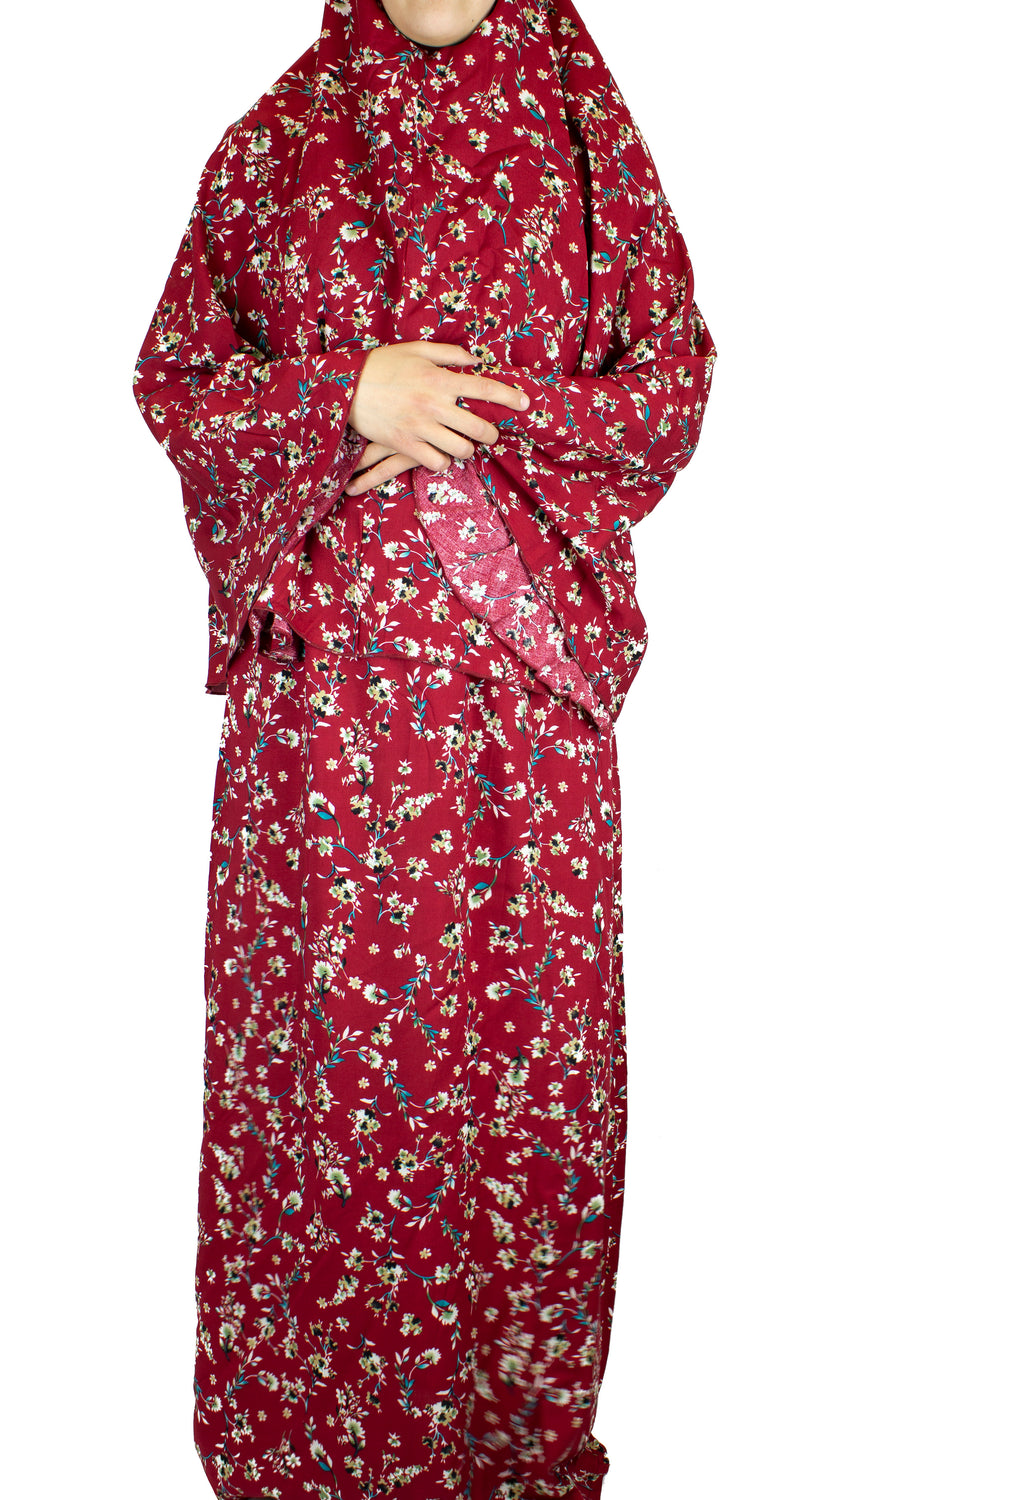 maroon floral print two piece salah prayer outfit with hijab and skirt